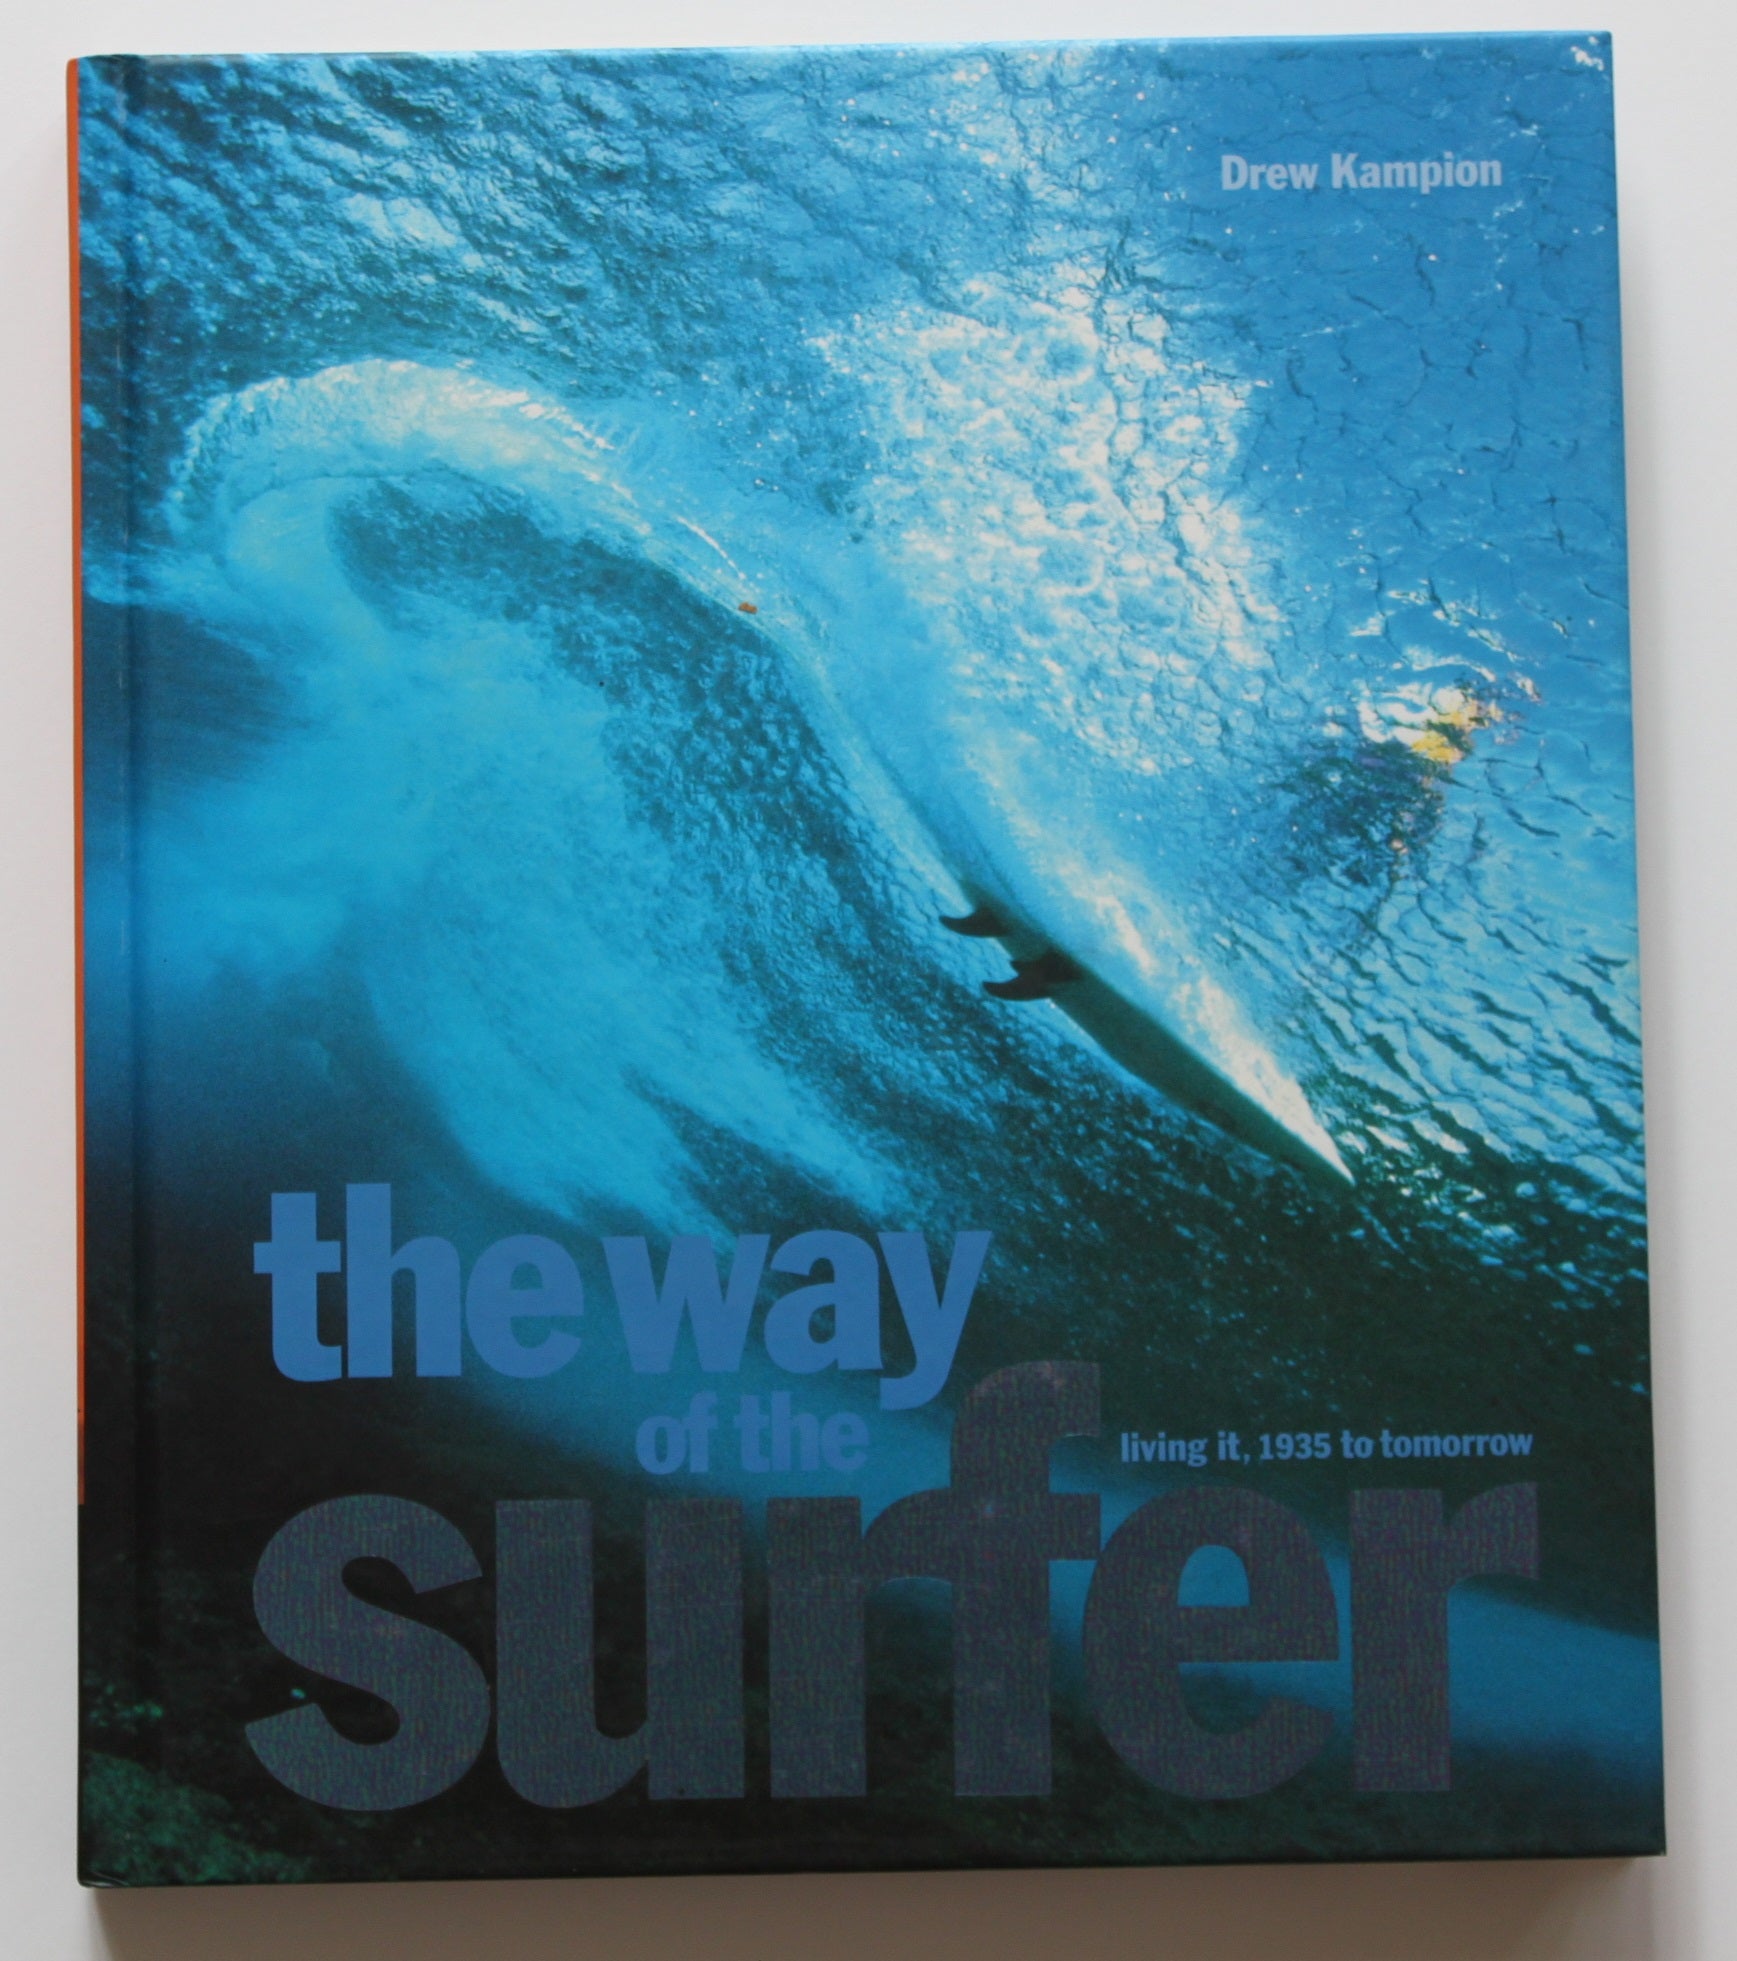 The Way of the Surfer by Drew Kampion.